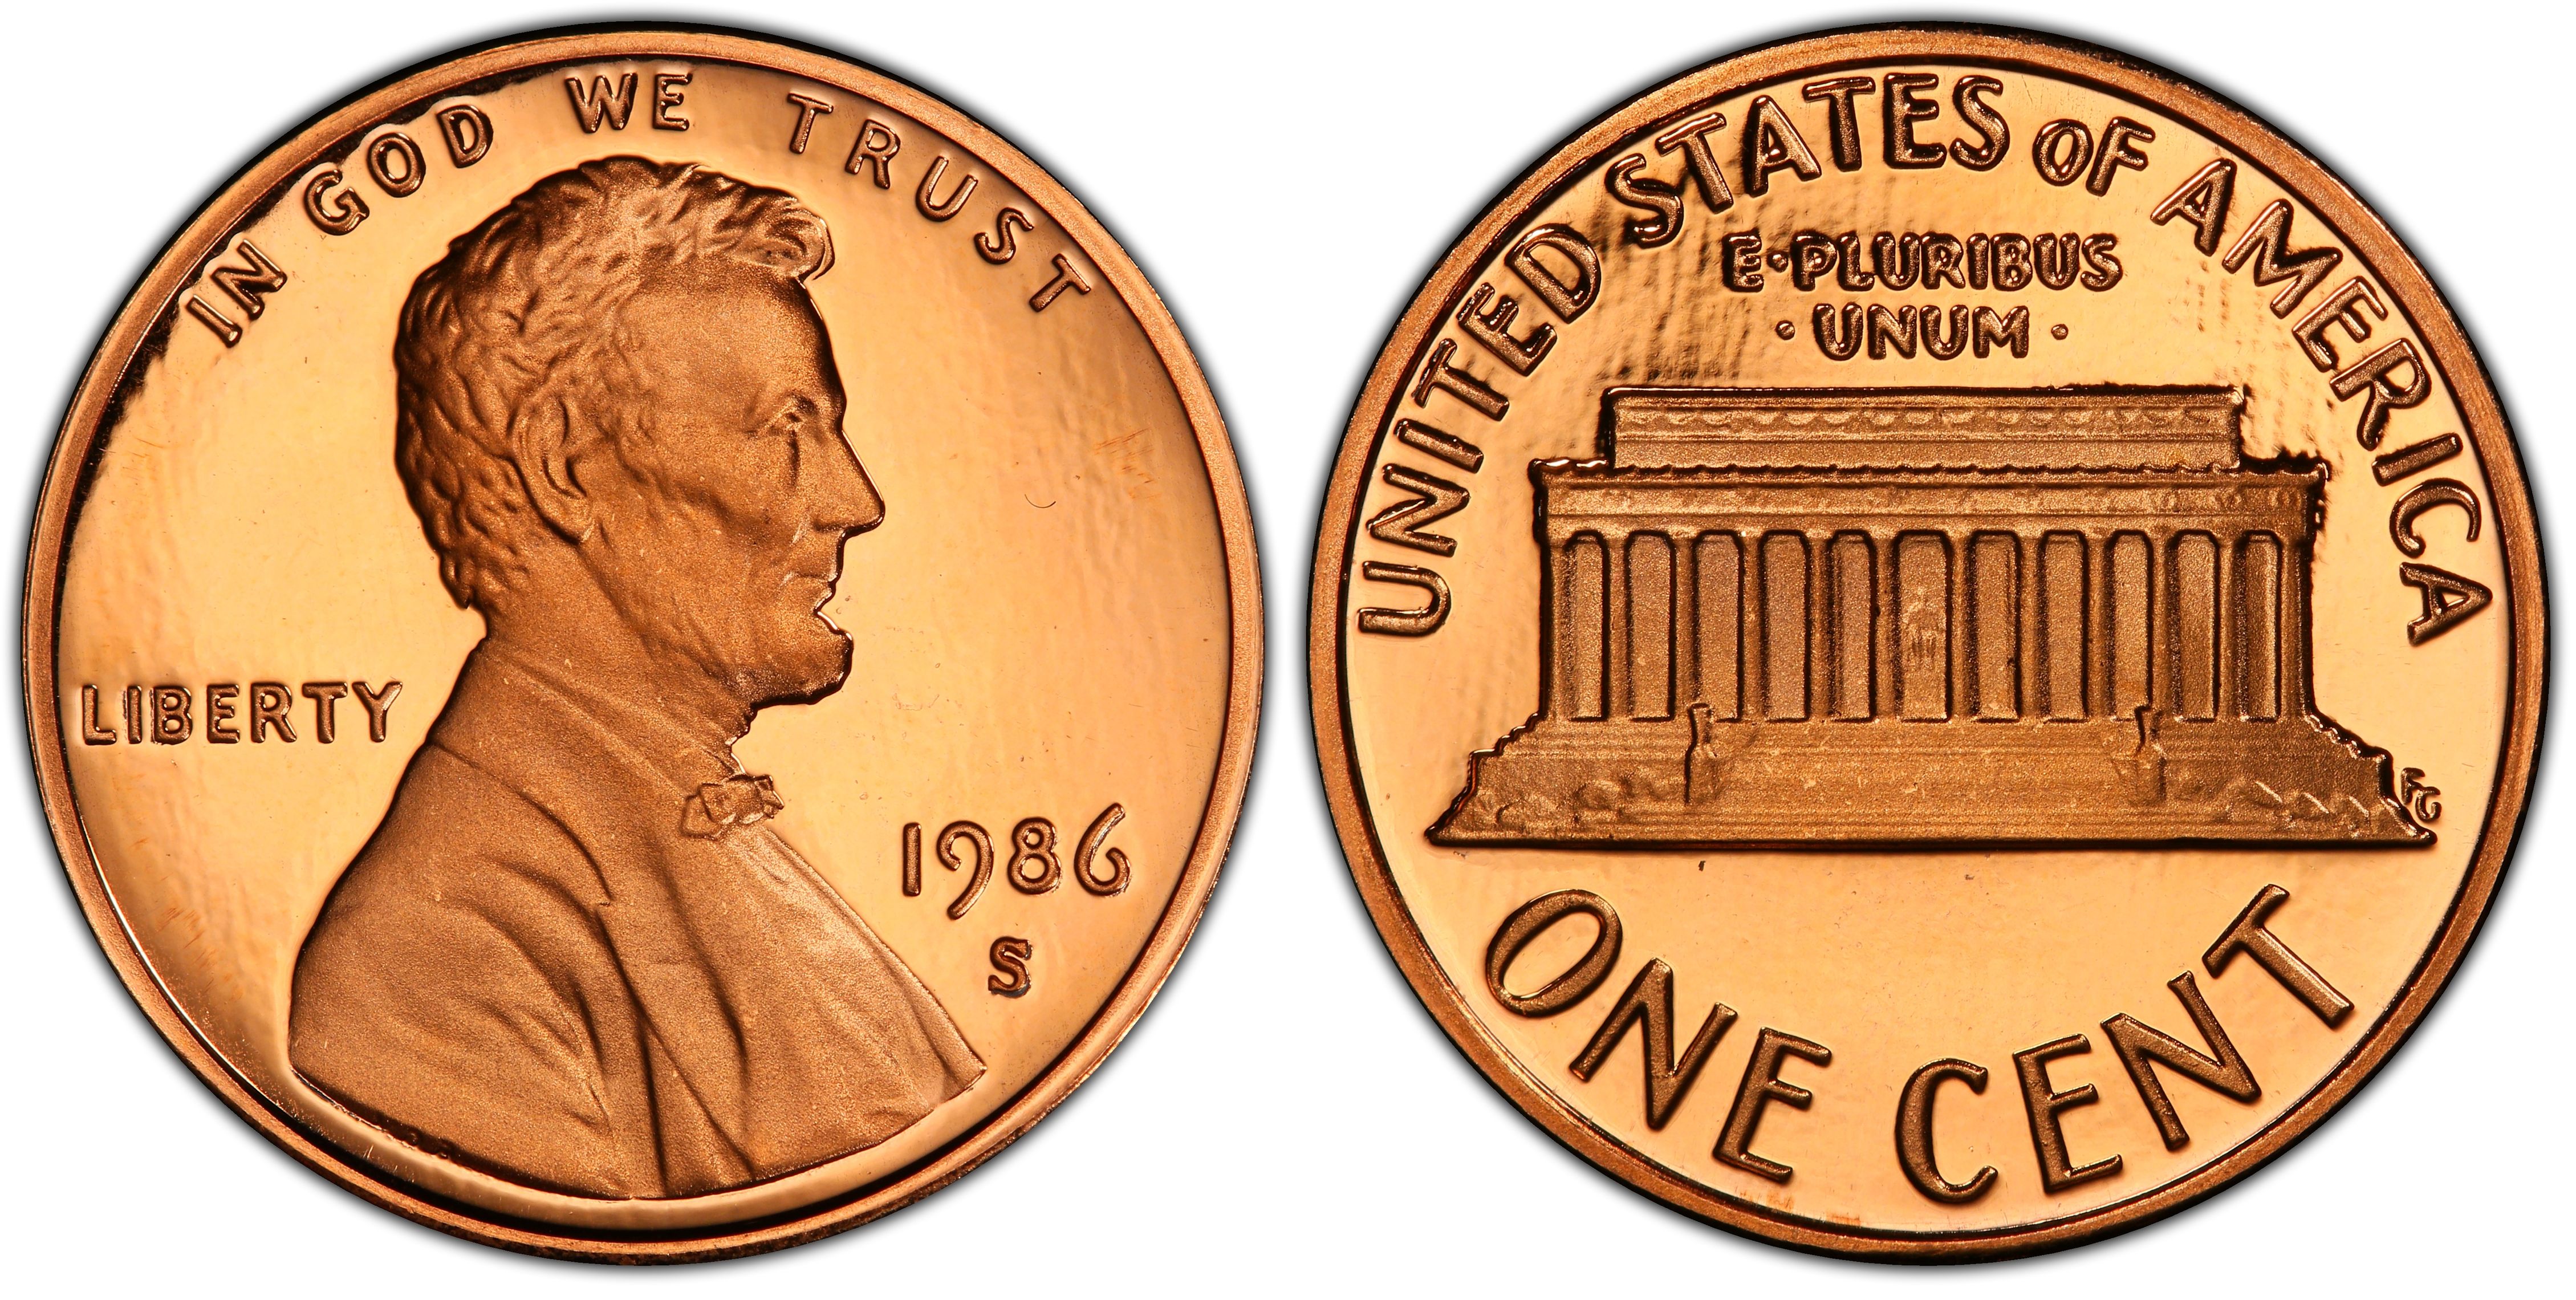 Etats-Unis UNITED STATES - 201 b - 1 CENT 1986 S - LINCOLN MEMORIAL PENNY  PROOF